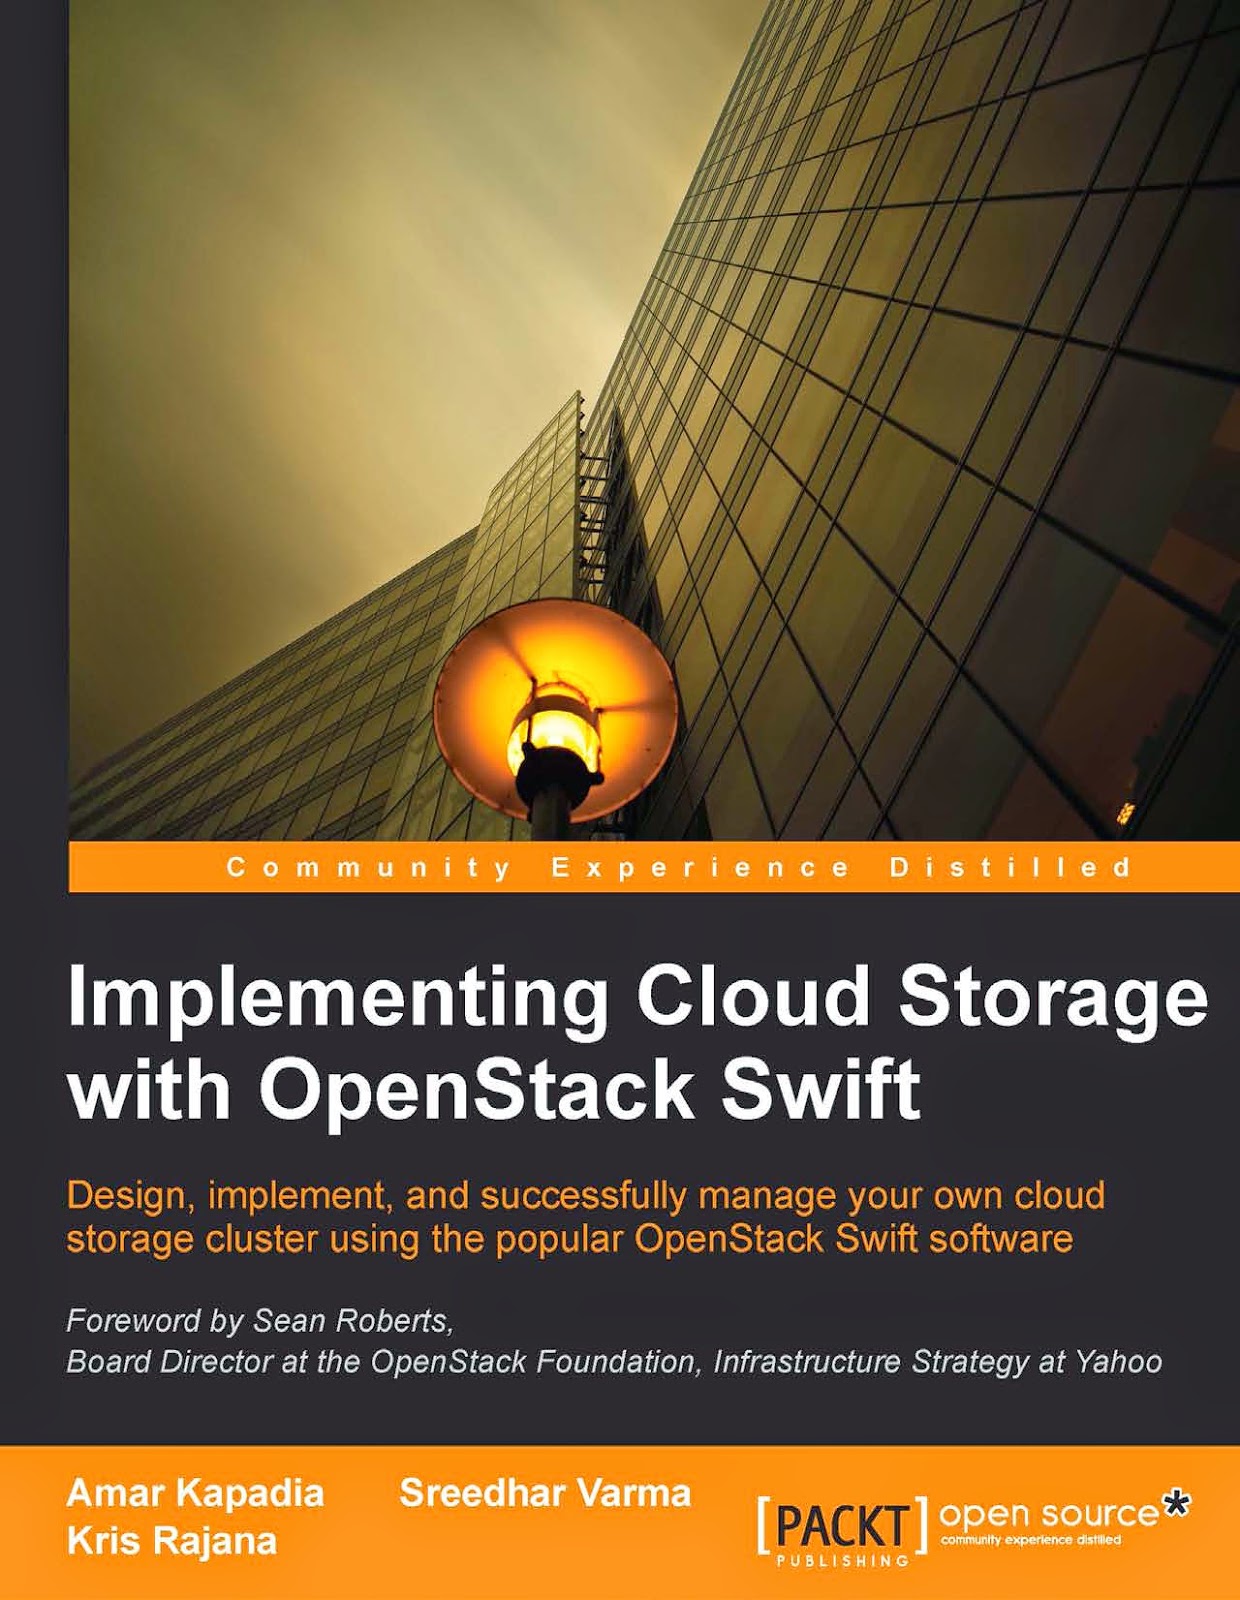 http://kingcheapebook.blogspot.com/2014/07/implementing-cloud-storage-with.html